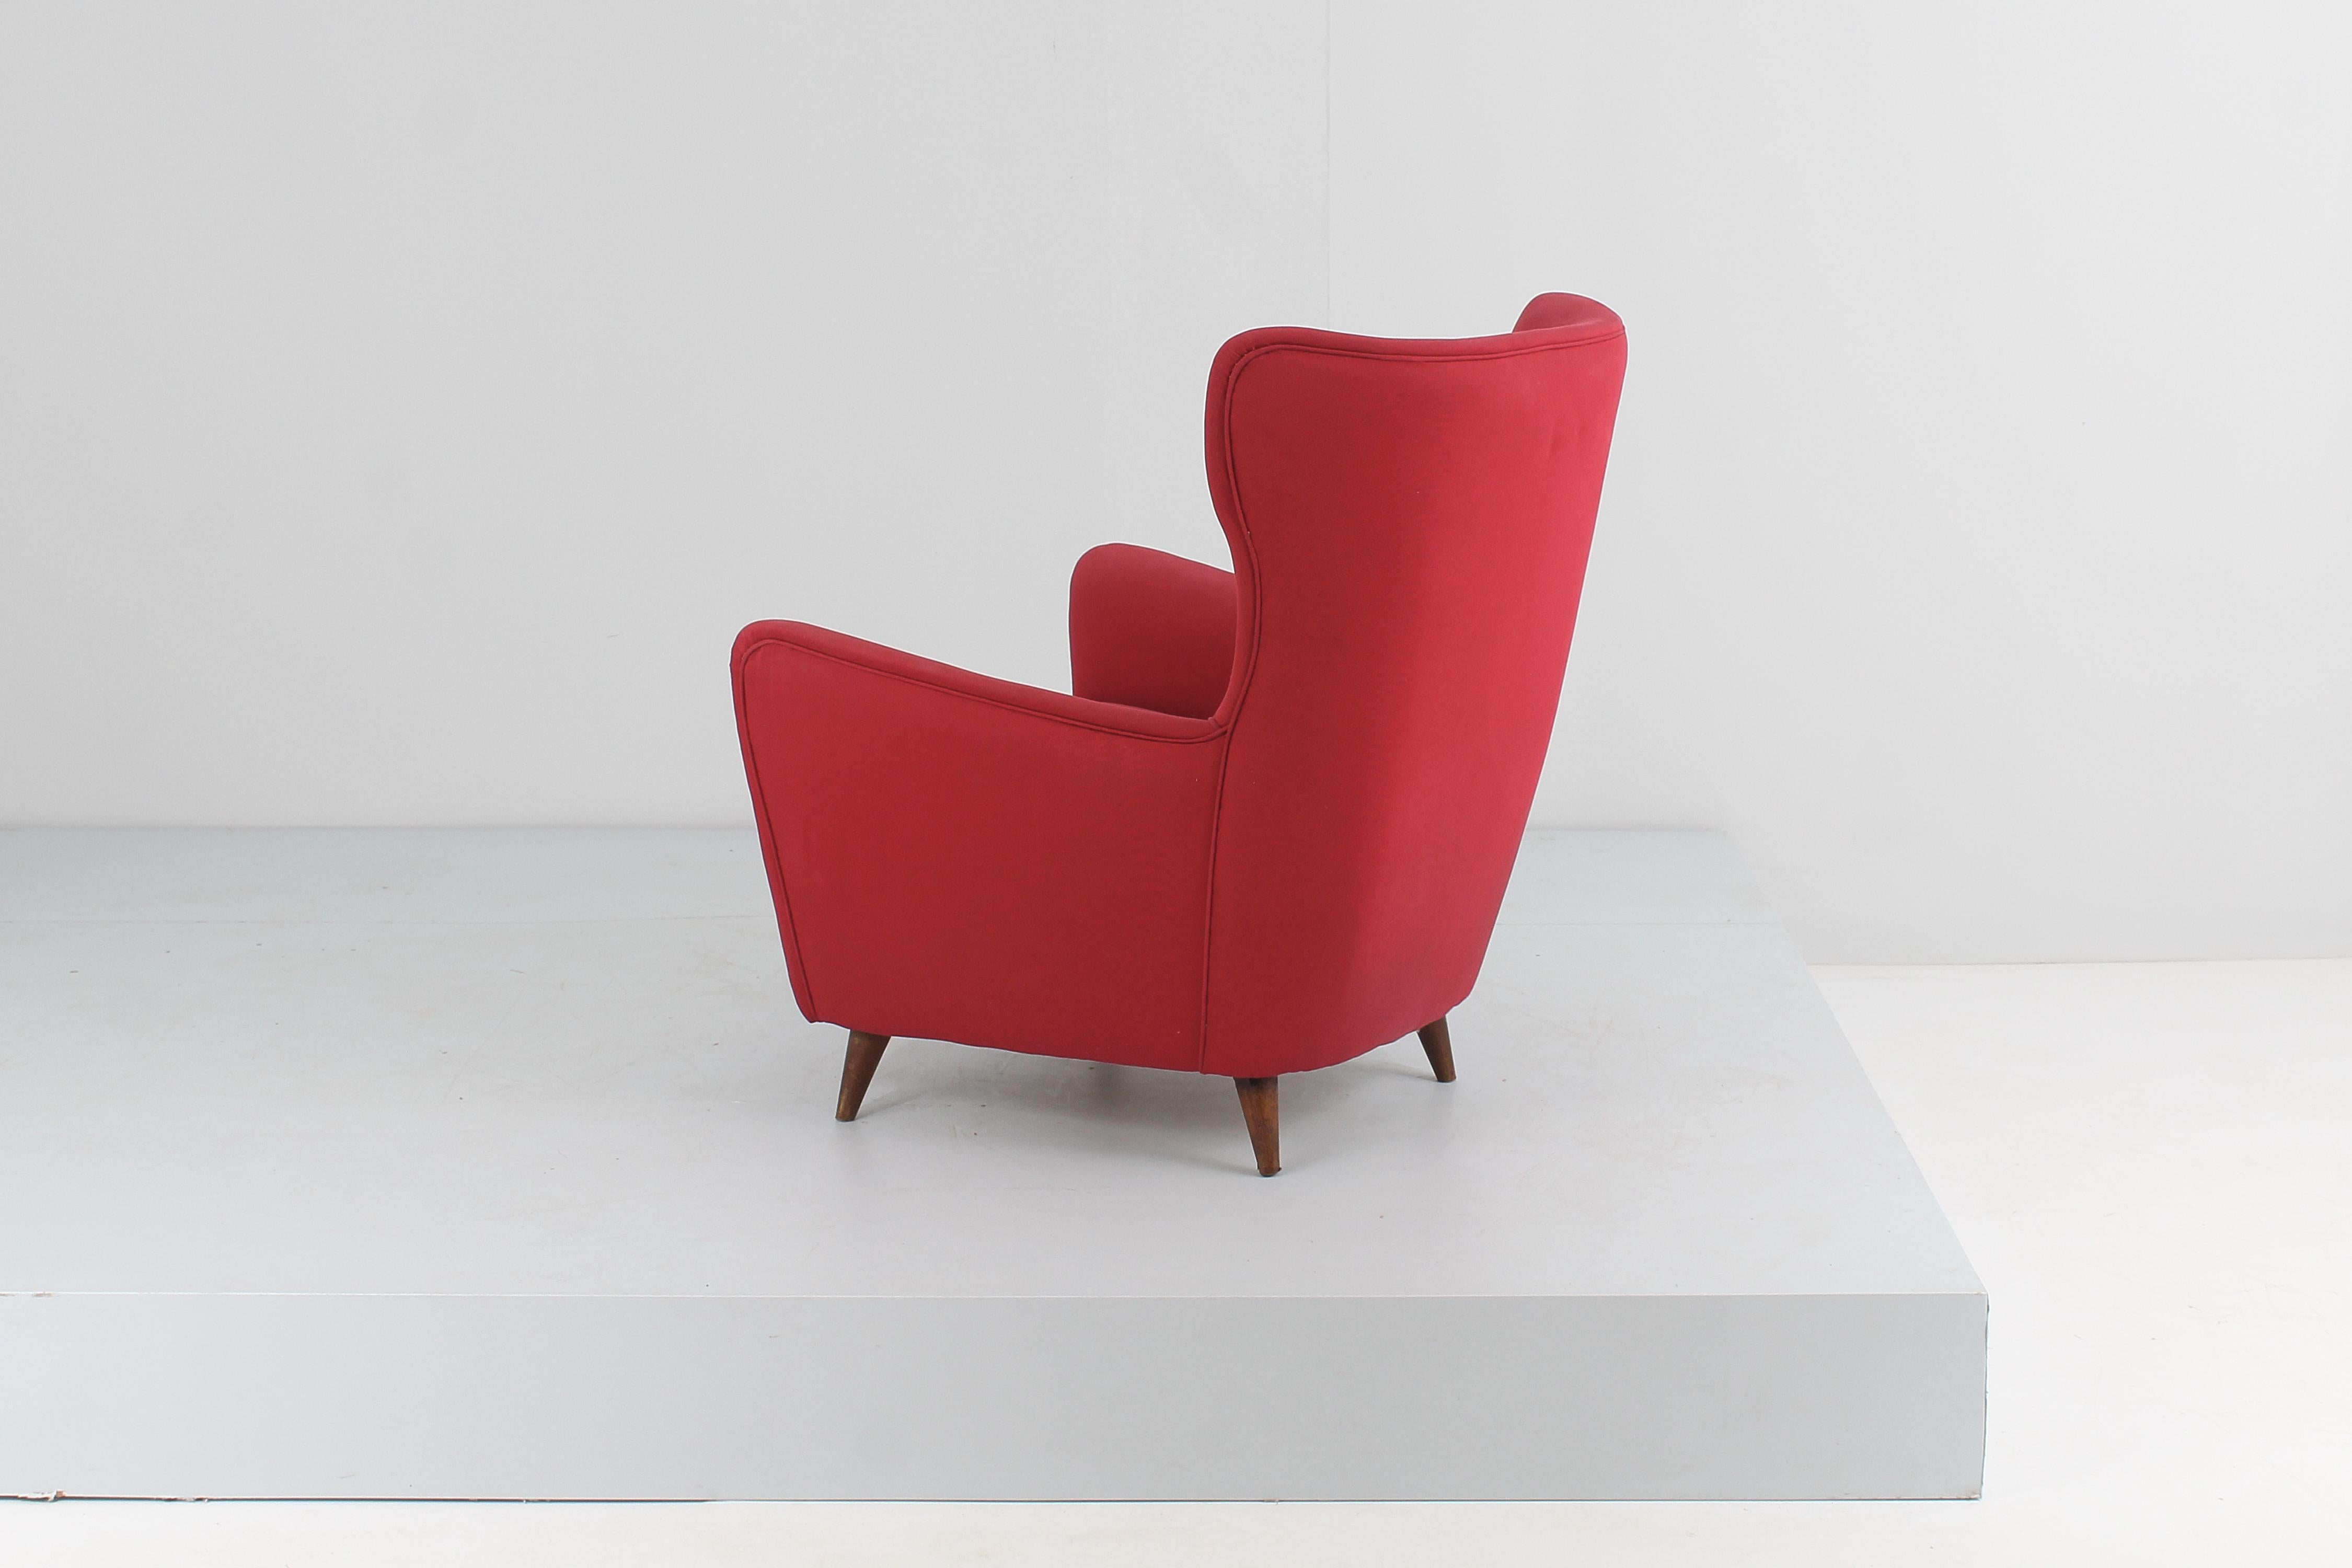 Mid-20th Century Midcentury Giò Ponti Style Wood and Red Fabric Armchair, circa 1950s Italy  For Sale